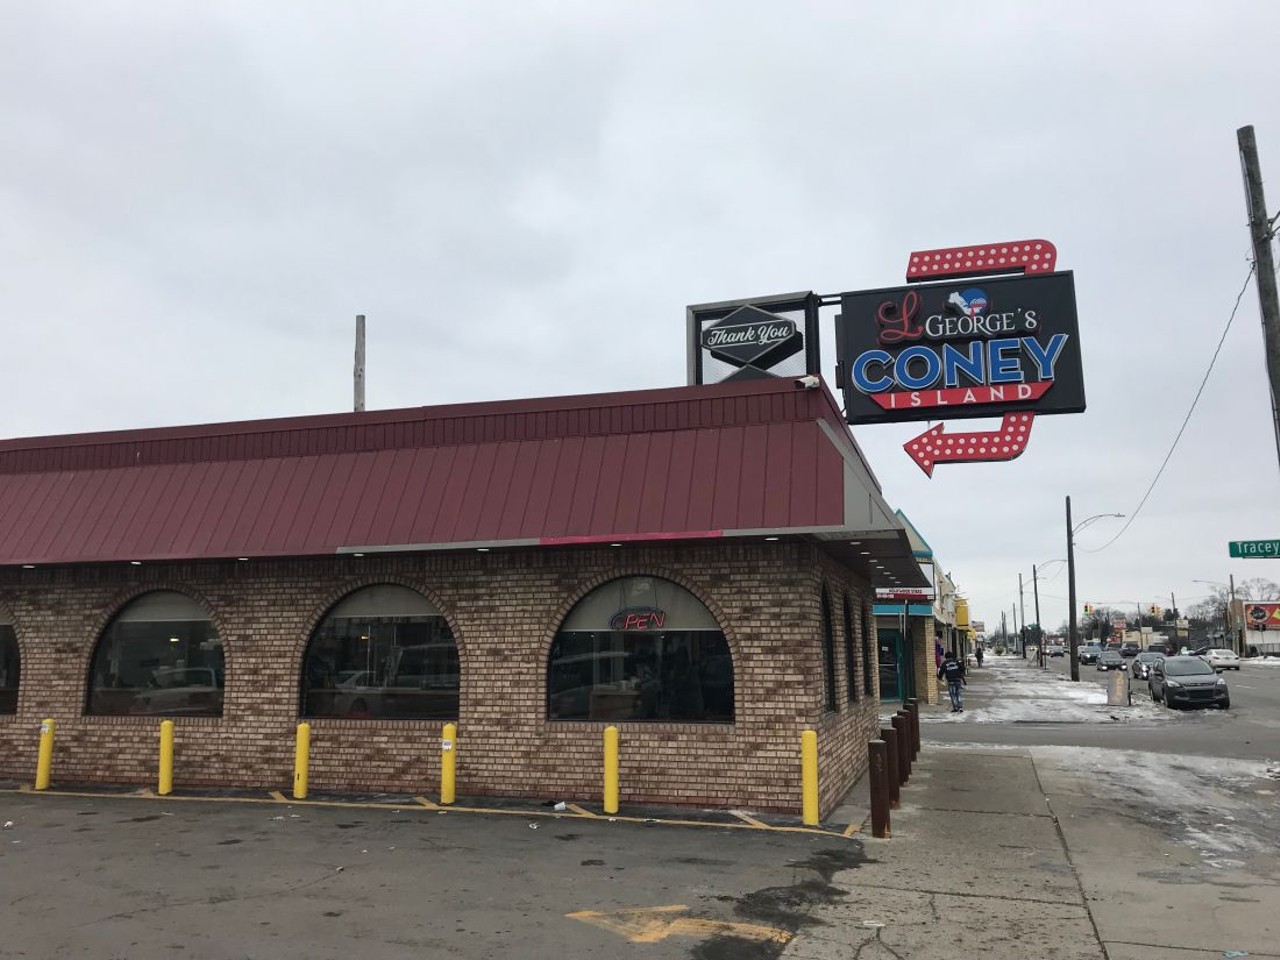 19. L Georges Coney Island
13635 W. McNichols Rd., Detroit
No frills. No fuss. They claim to serve NY-style dogs, but they don&#146;t skimp on the portions so L Georges gets a W from us. All their locations are on Detroit&#146;s west side.
Photo by Mike Dionne